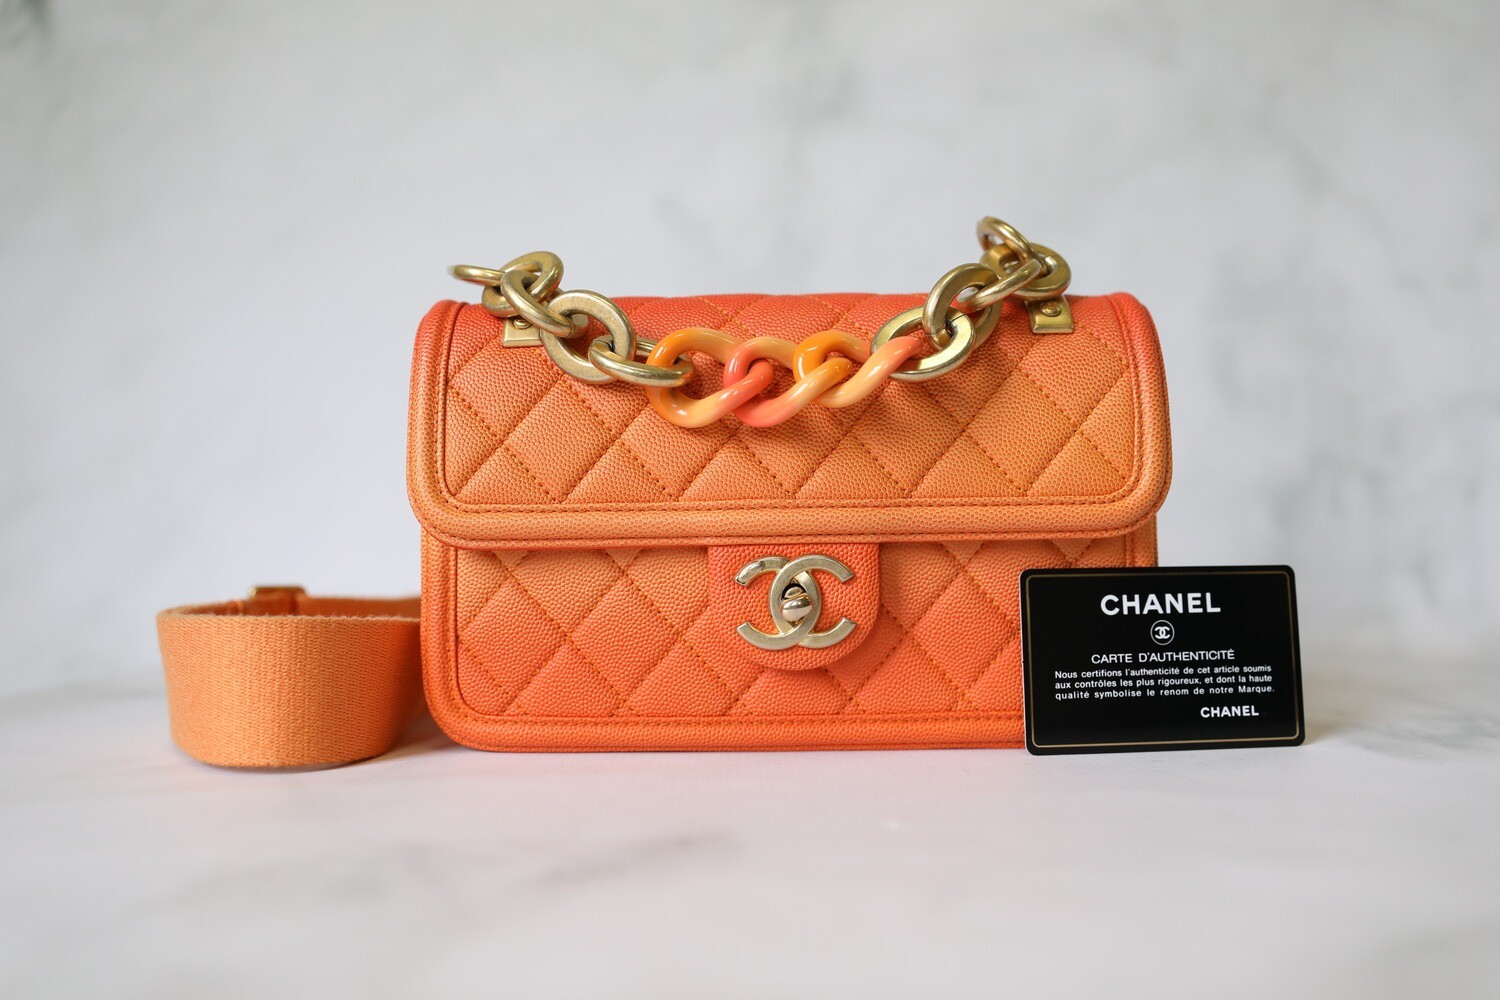 Chanel Sunset by the Sea Bag, Orange Ombre Caviar with Gold